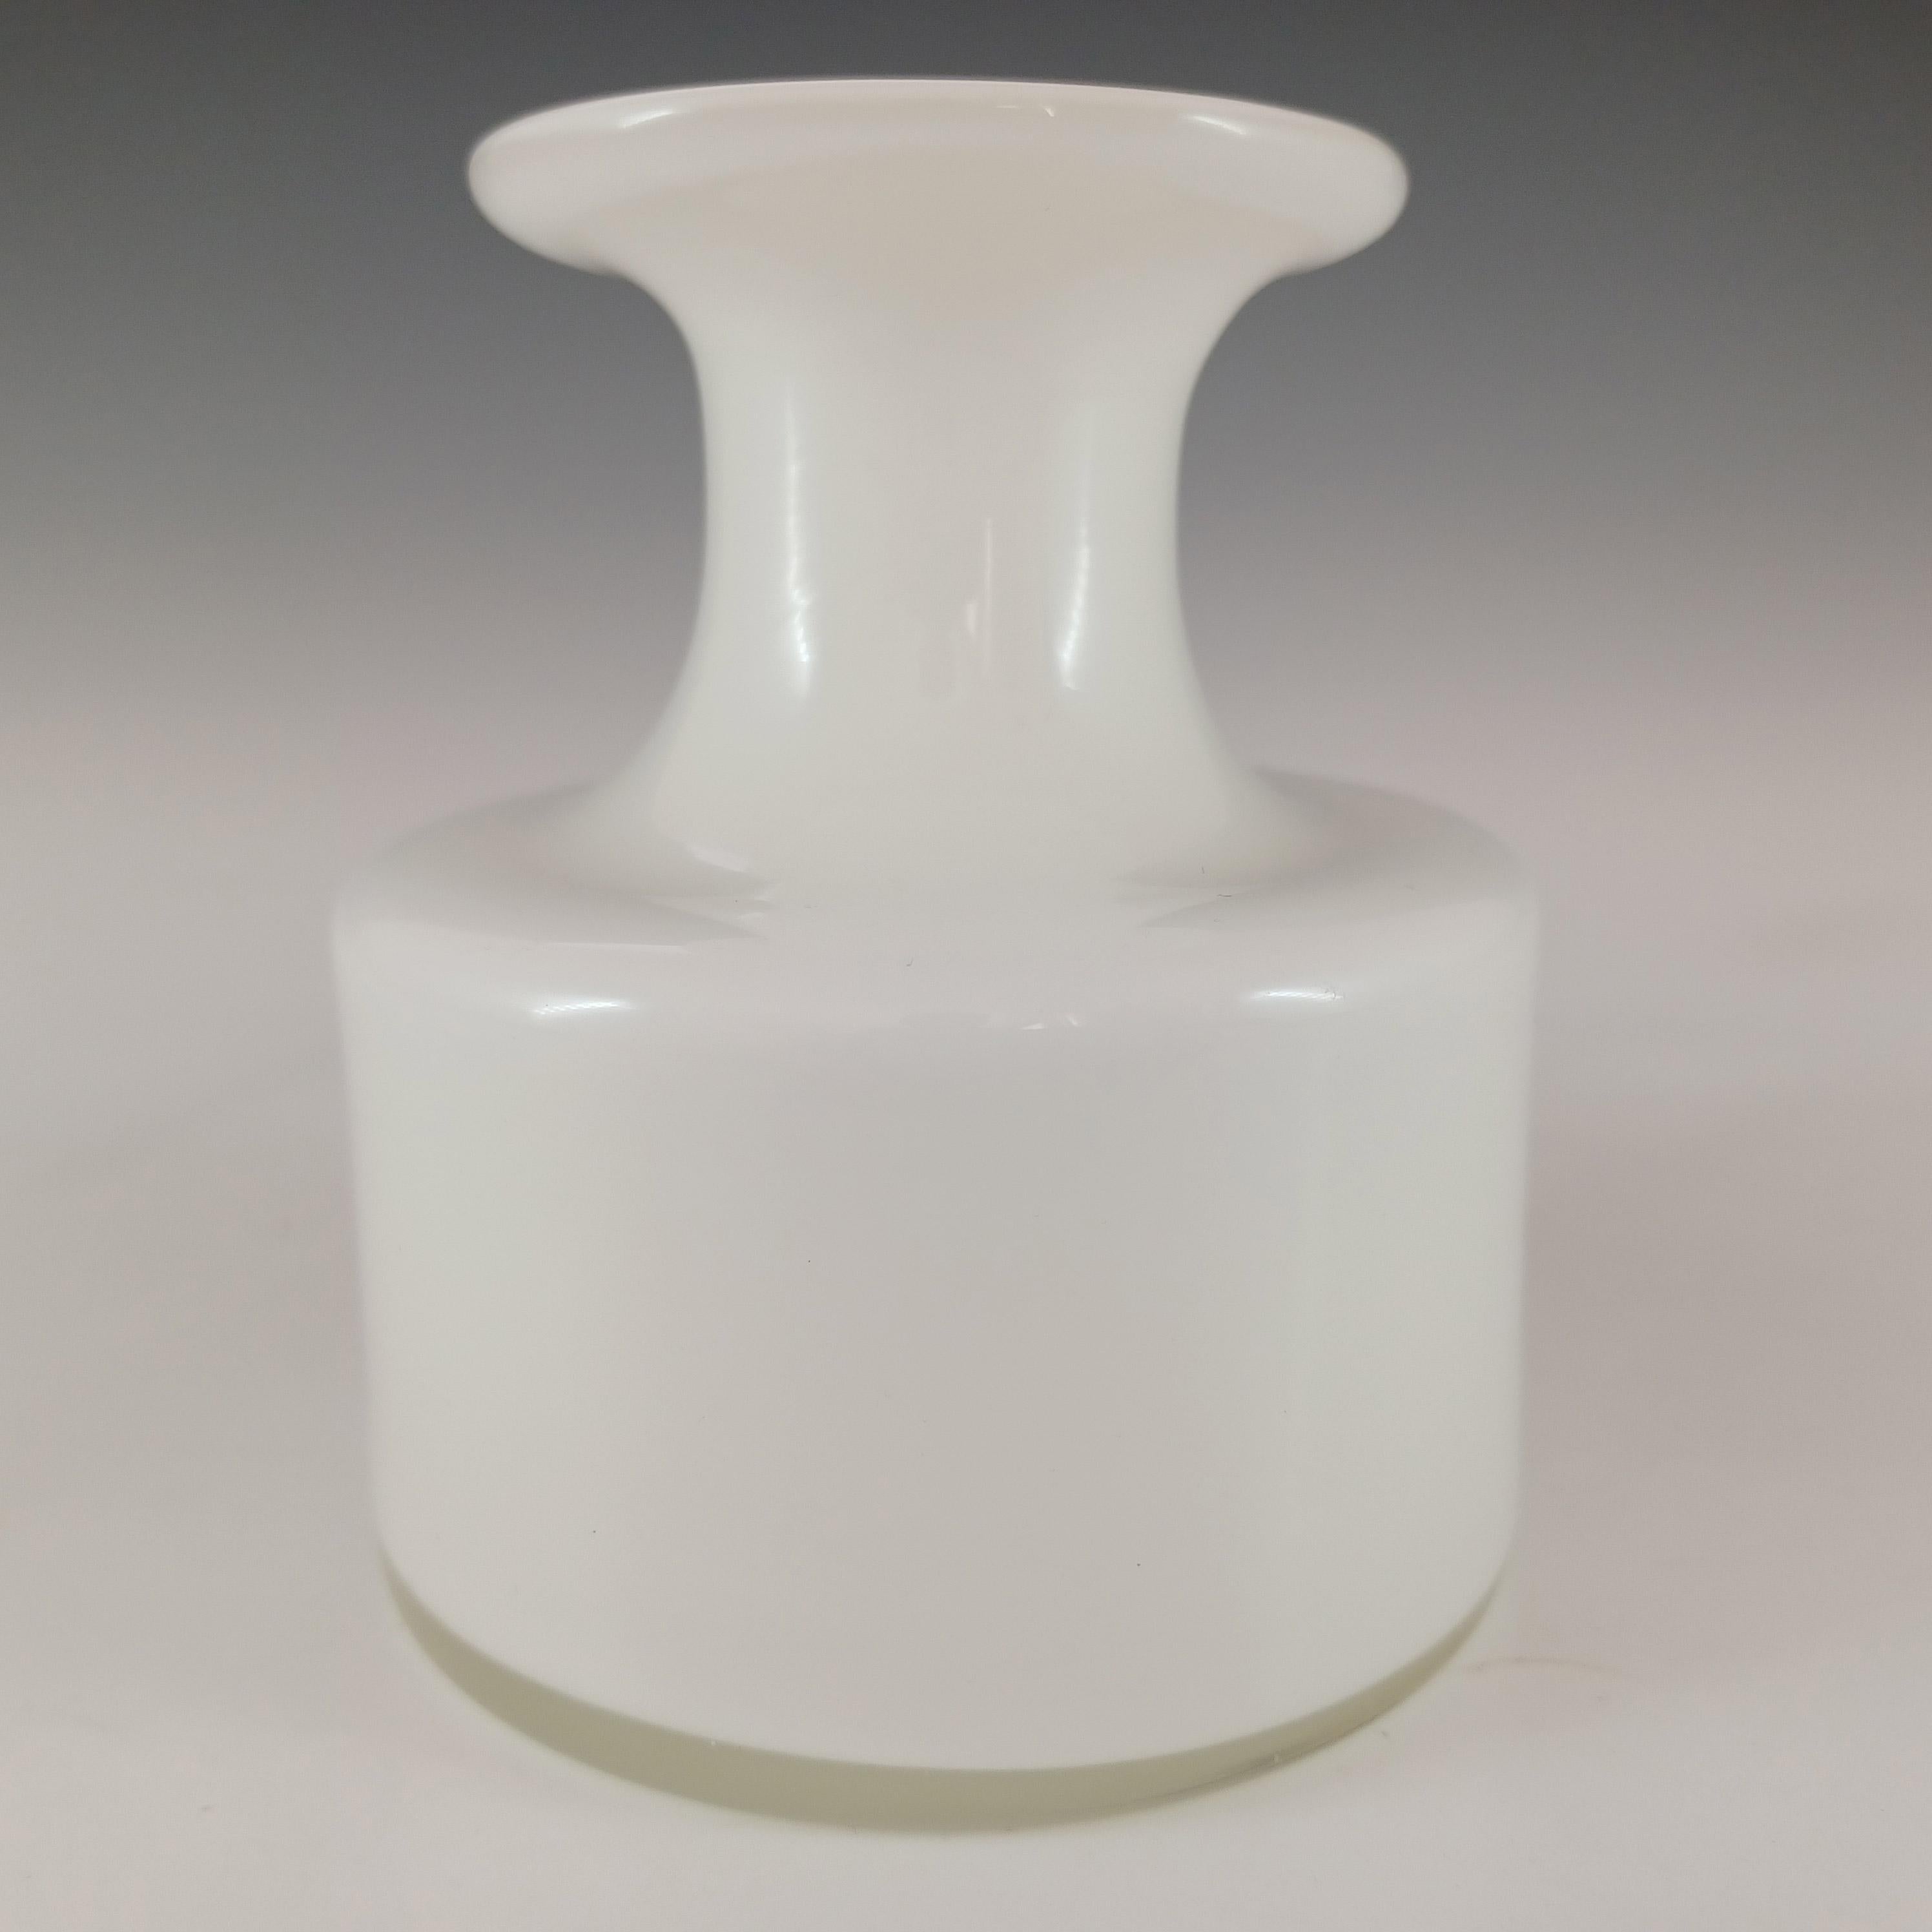 A stunning Scandinavian opal white glass vase. Made by Holmegaard of Denmark, designed by Per Lutken, part of his 